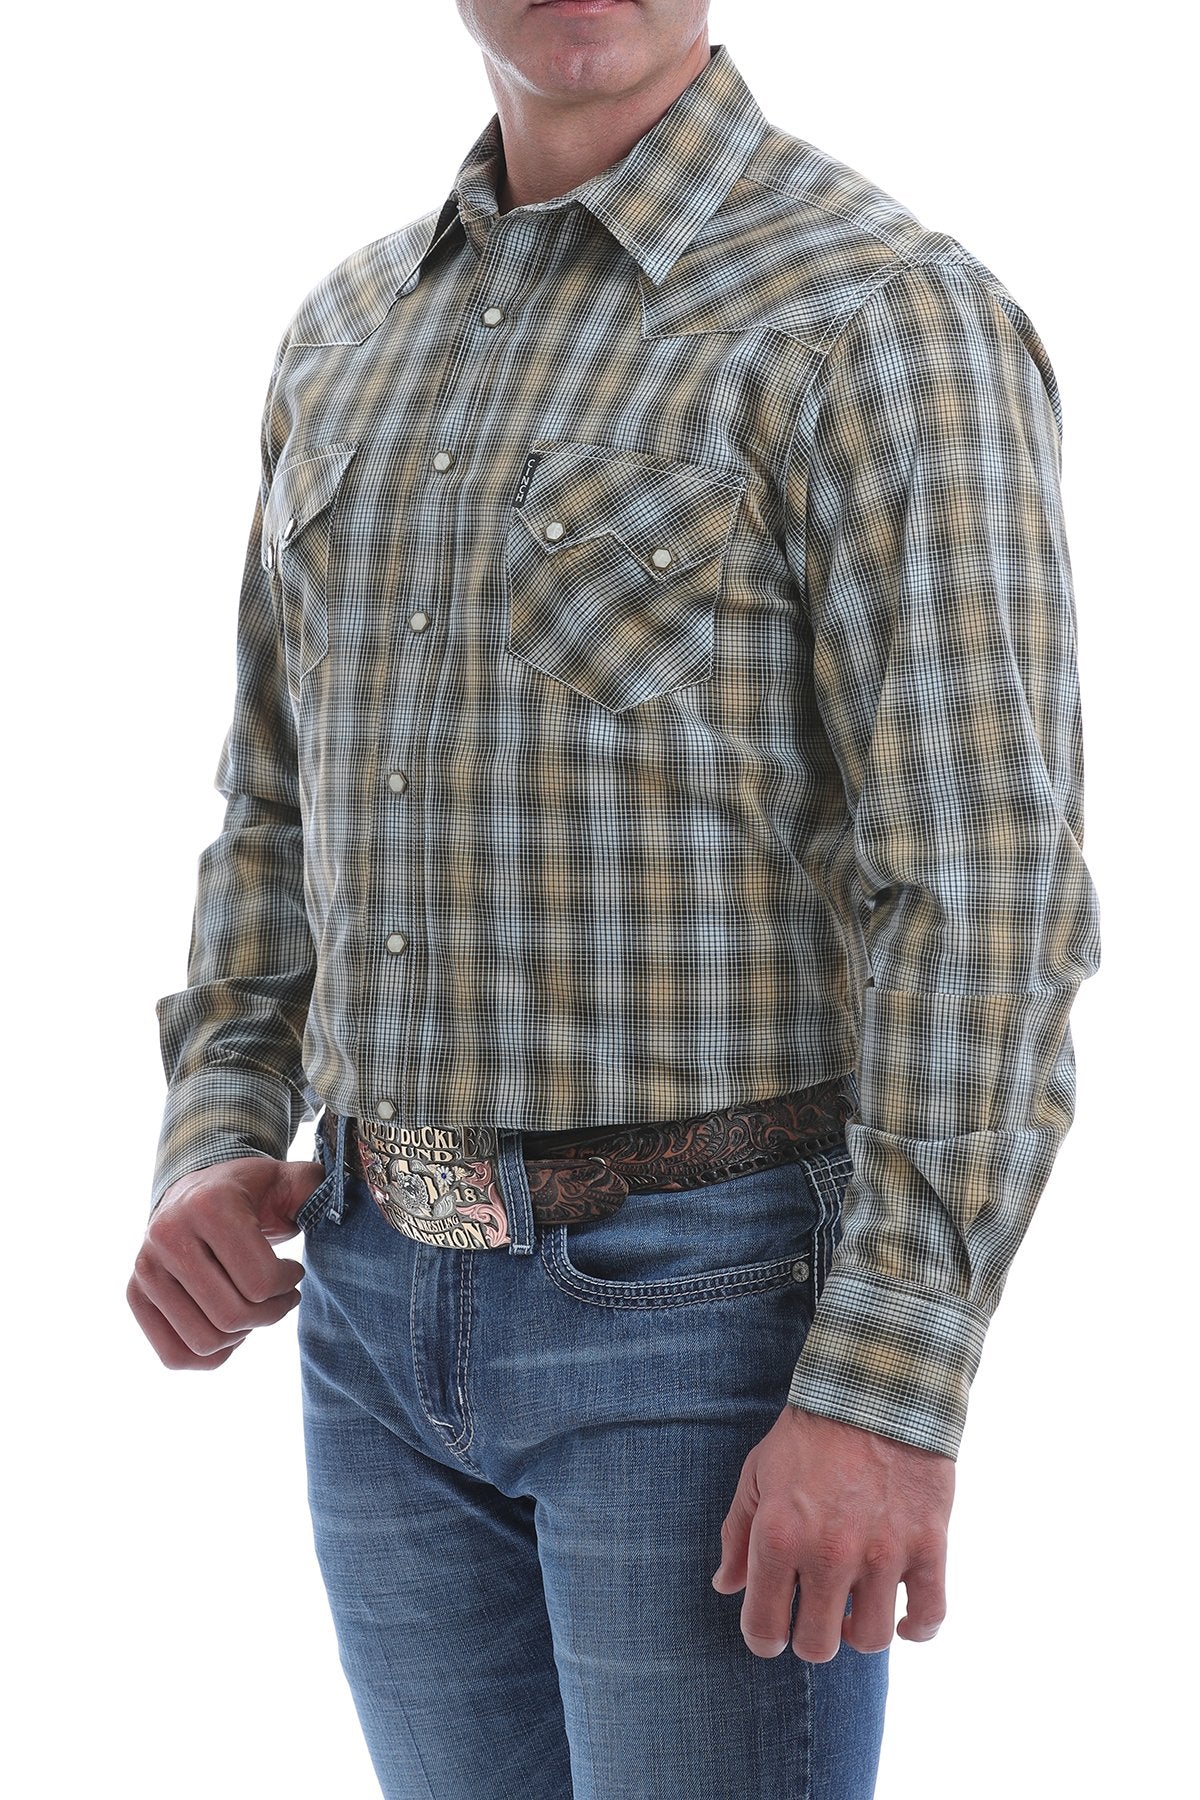 Men's Modern Fit Tan, Blue and Charcoal Plaid Western Snap Shirt